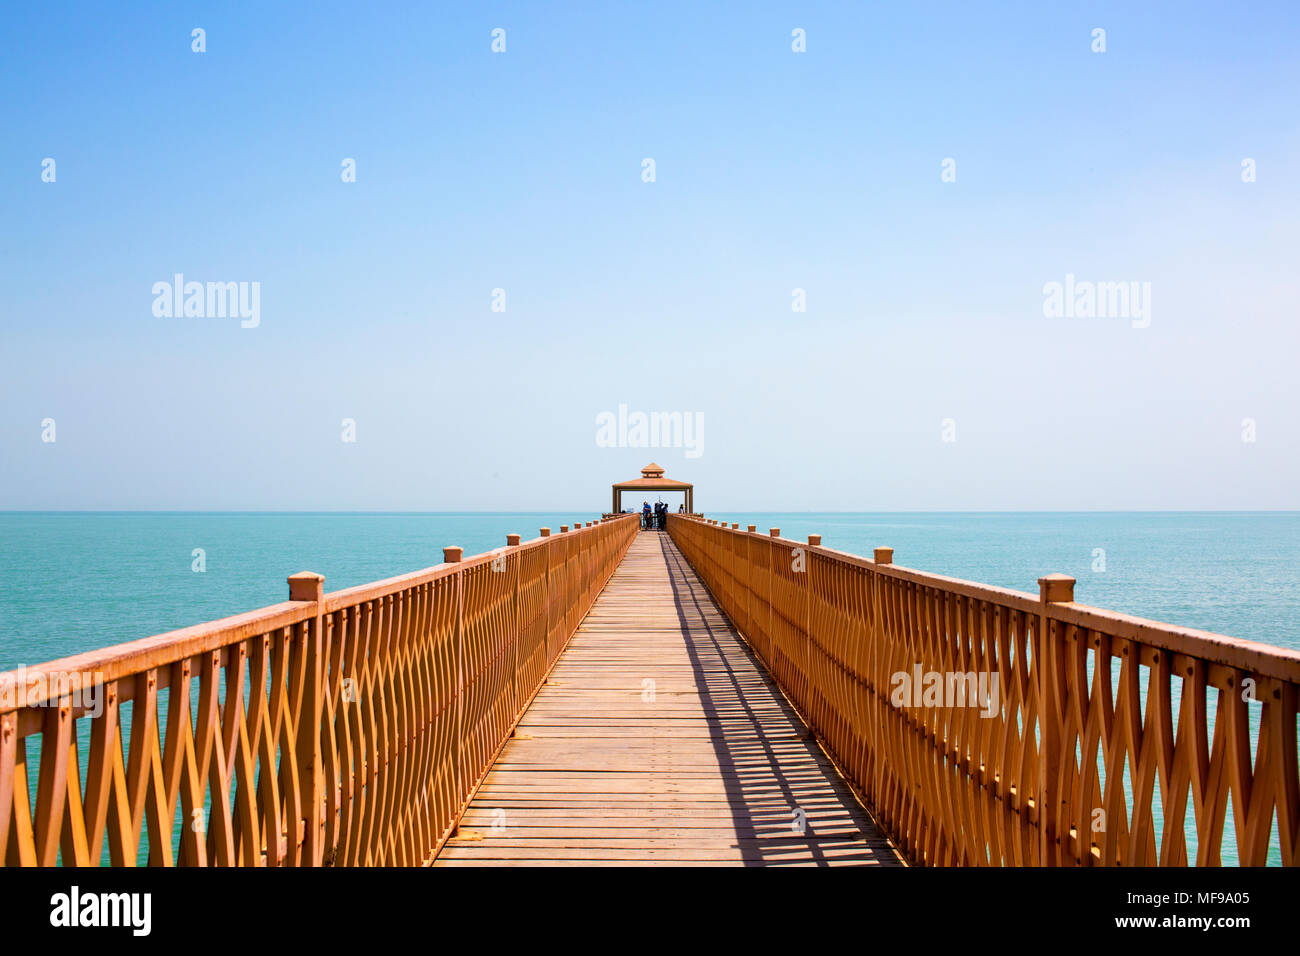 Pier out to sea in Kuwait, on the Persian Gulf Stock Photo